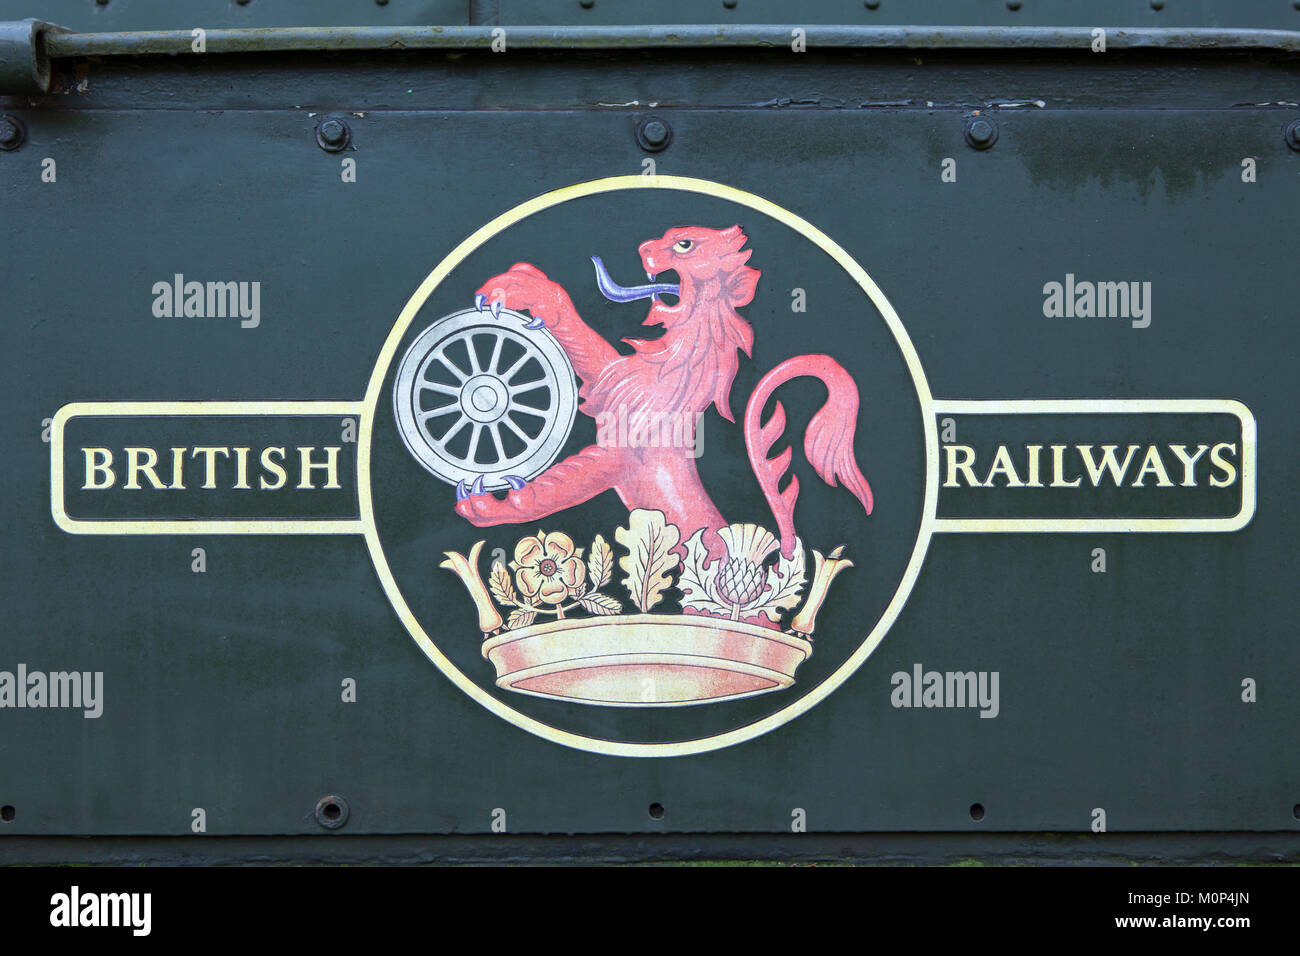 British Railways logo set on a green background. Lion wheel and heraldry crown symbols used between 1956 and 1965. Stock Photo